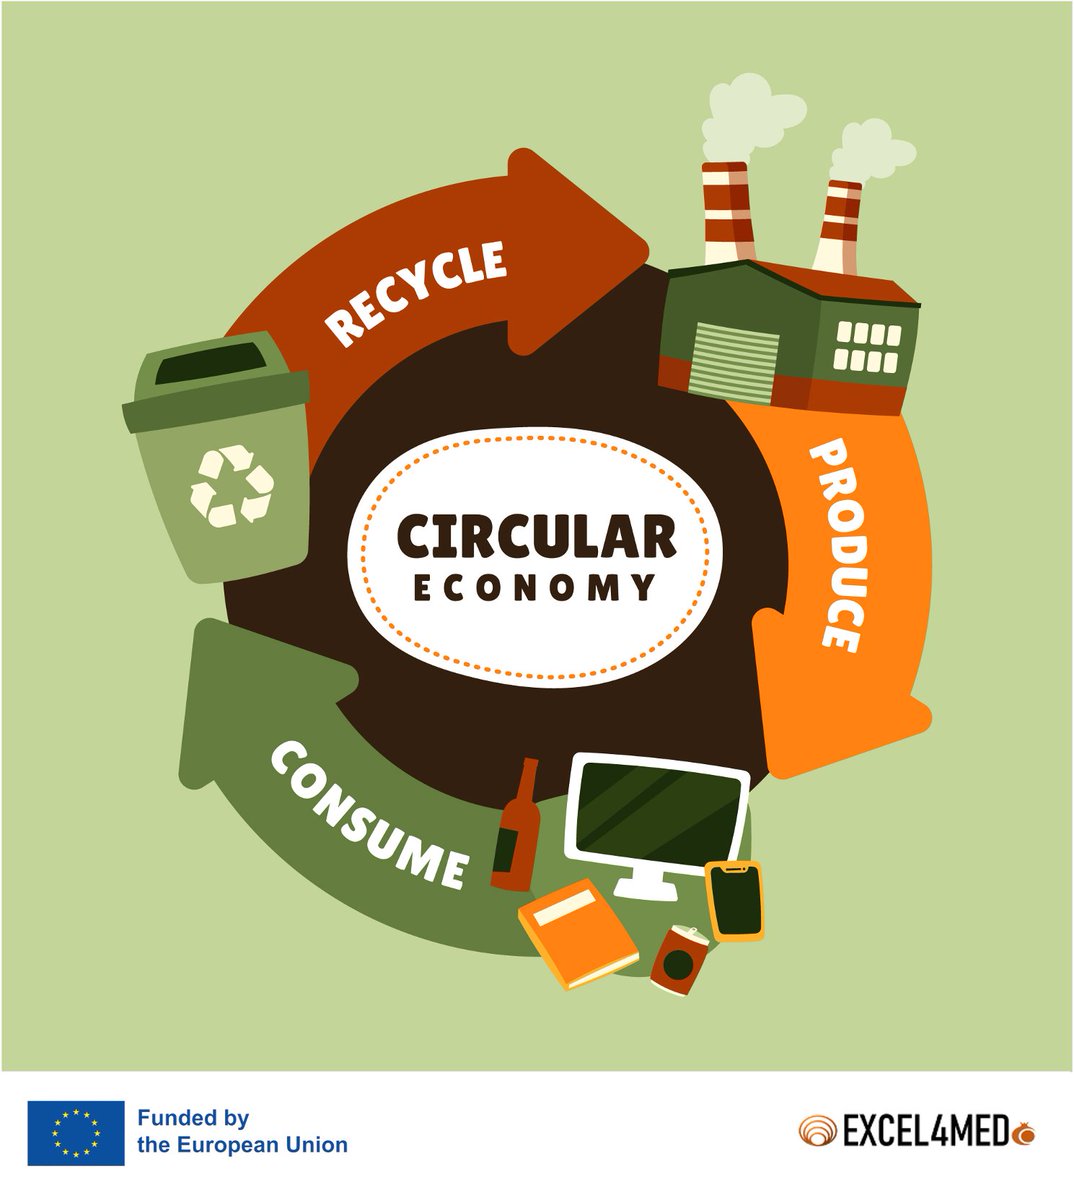 🌍 Shaping a Sustainable Future with Circular Economy 
By 2050, Earth's resources face triple demand. The EU's shift to a circular economy is key for sustainability and job growth.
​
#Excel4med #HorizonEU #ResearchImpactEU #EUInnovation @REA_research